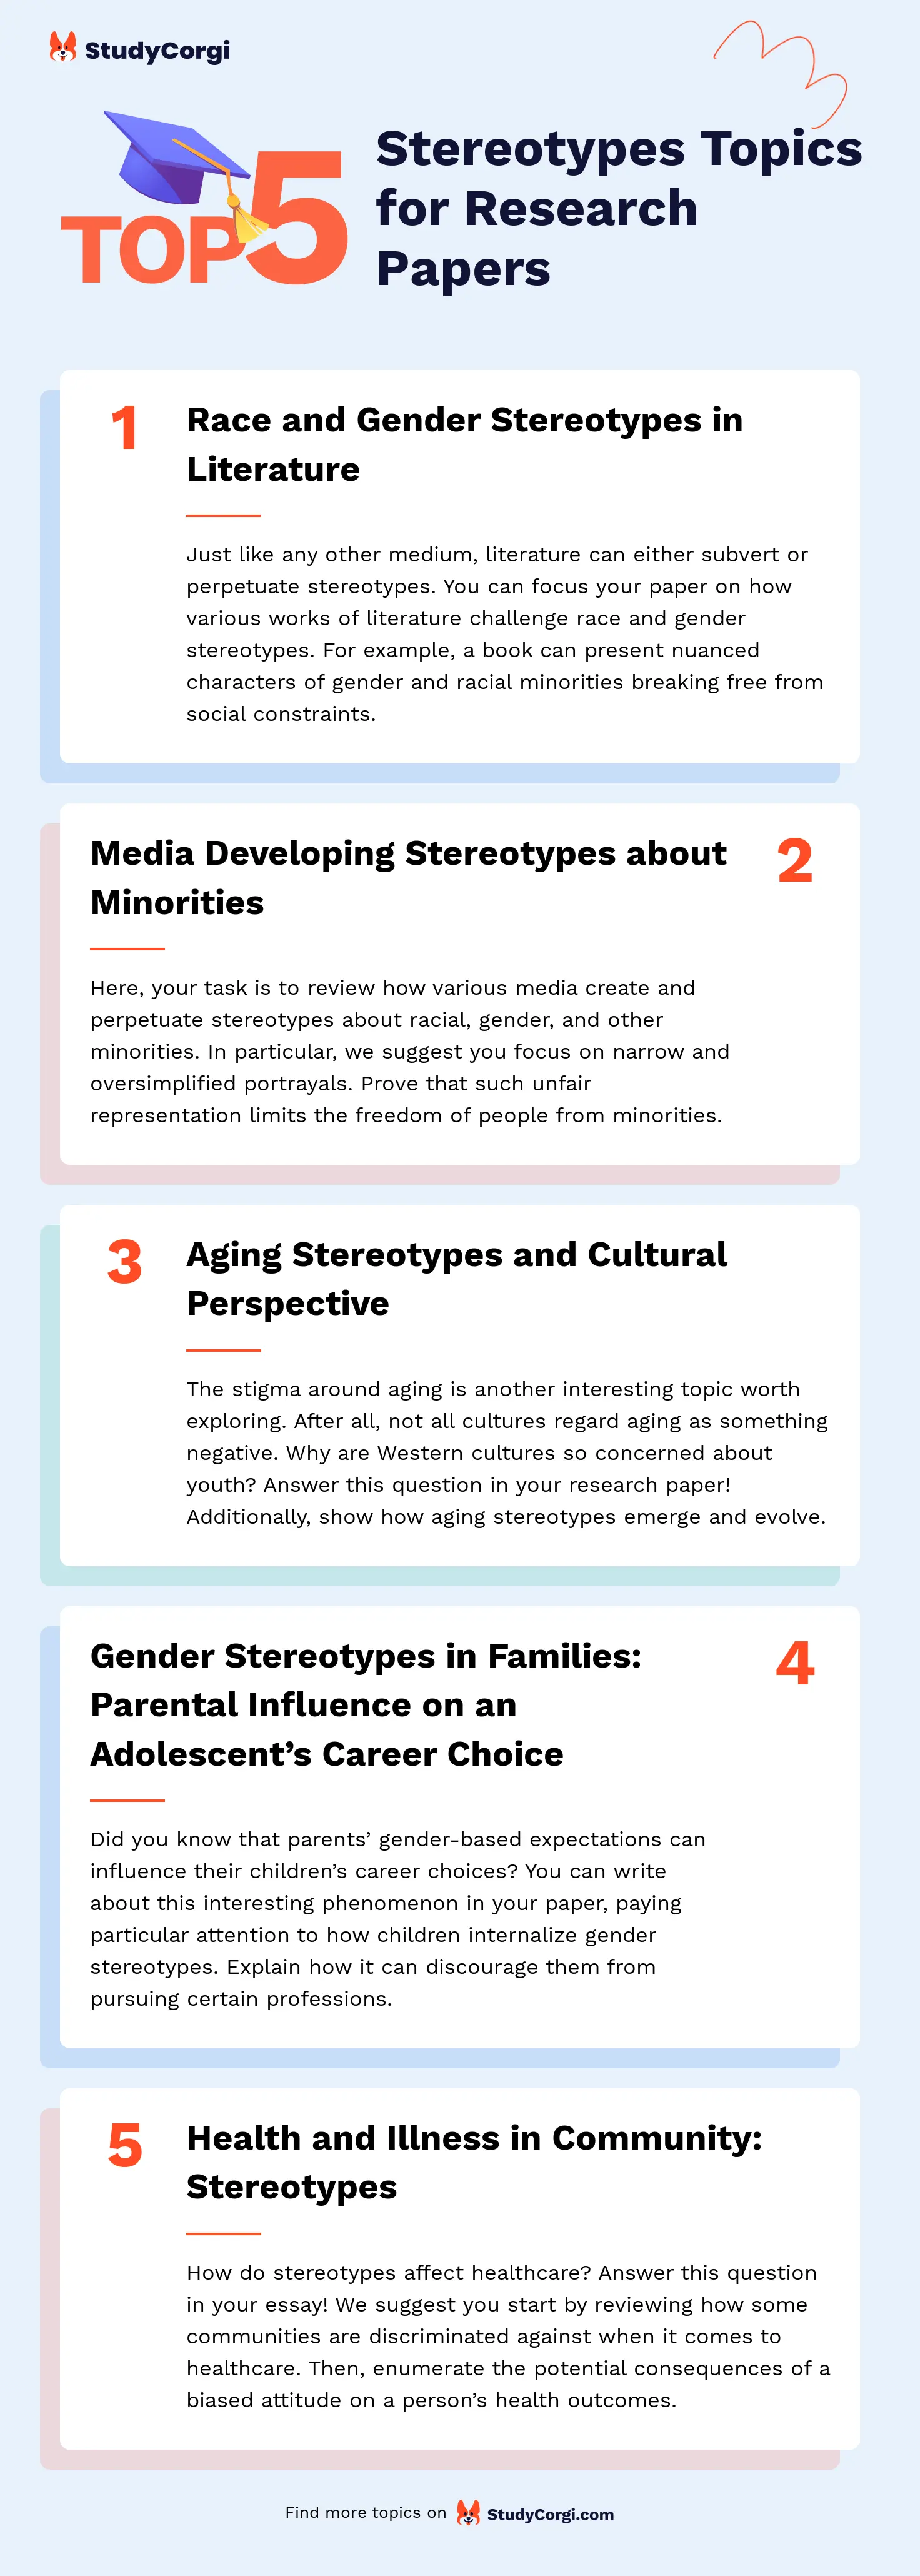 TOP-5 Stereotypes Topics for Research Papers